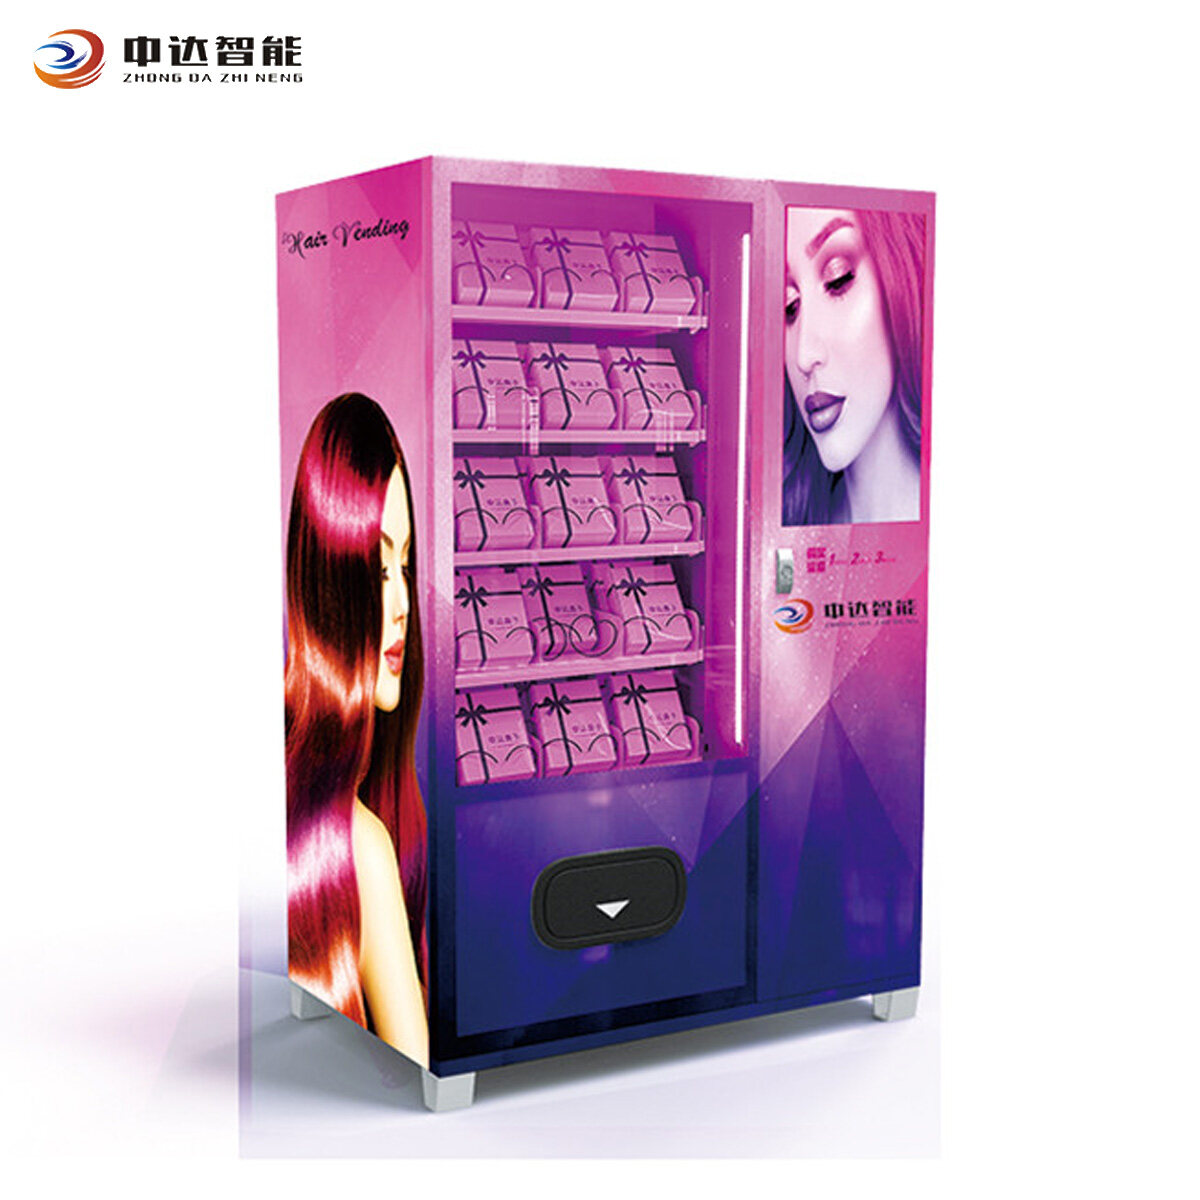 Wholesale small vending machine price,China buy hair vending machine,vending machine for beauty products ODM,small combo vending machine OEM